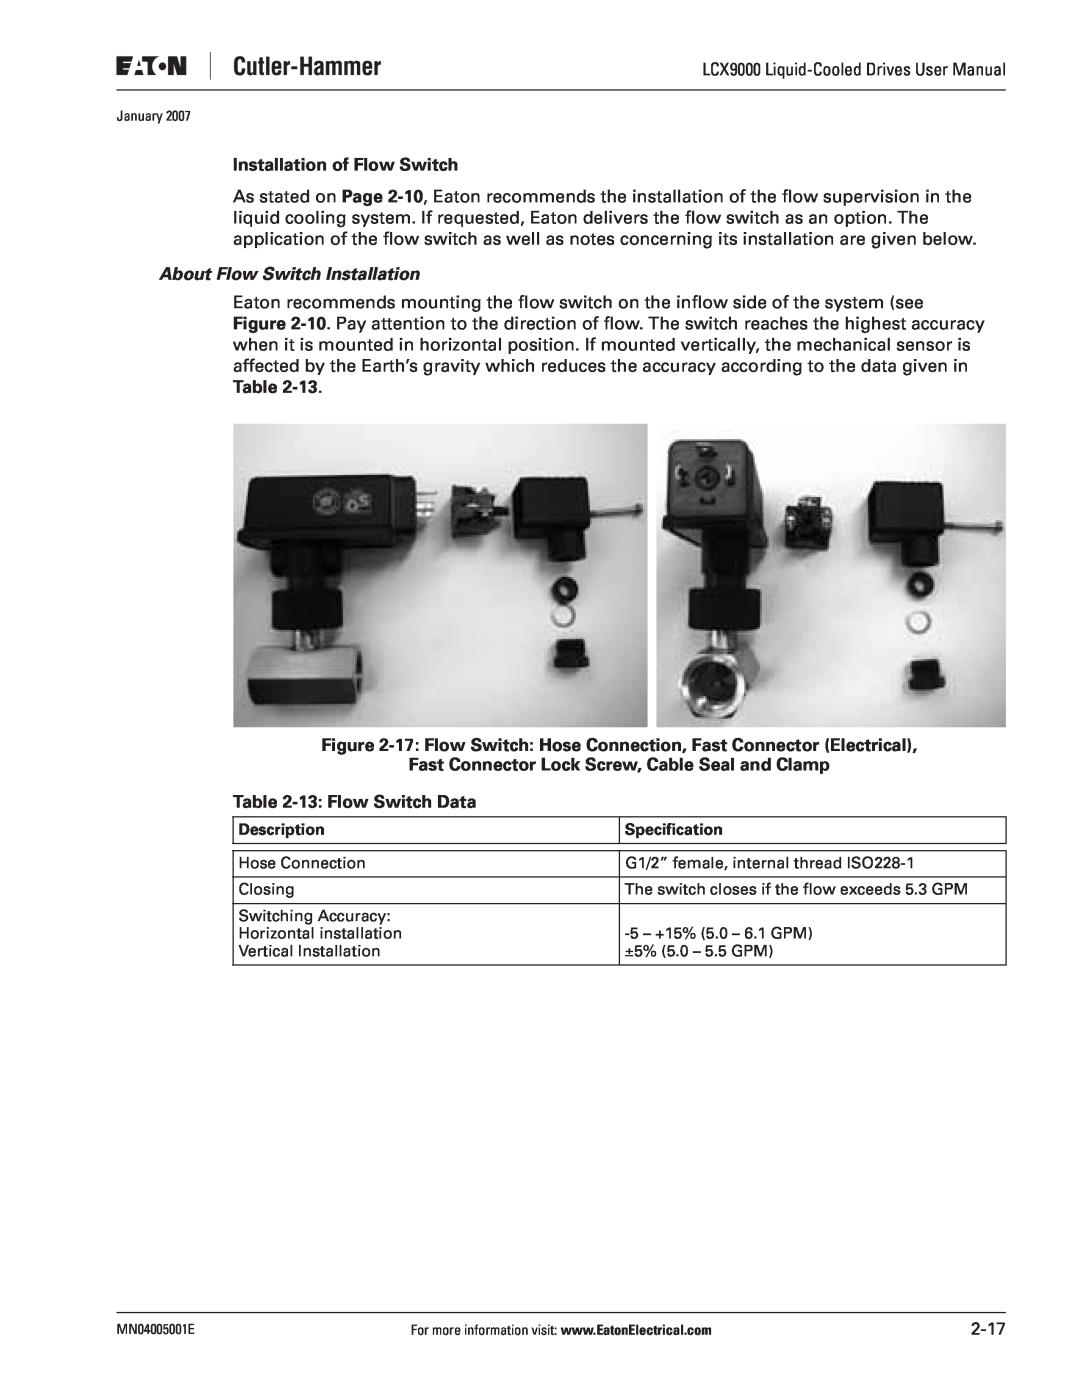 J. T. Eaton LCX9000 user manual Installation of Flow Switch, About Flow Switch Installation, 13 Flow Switch Data 